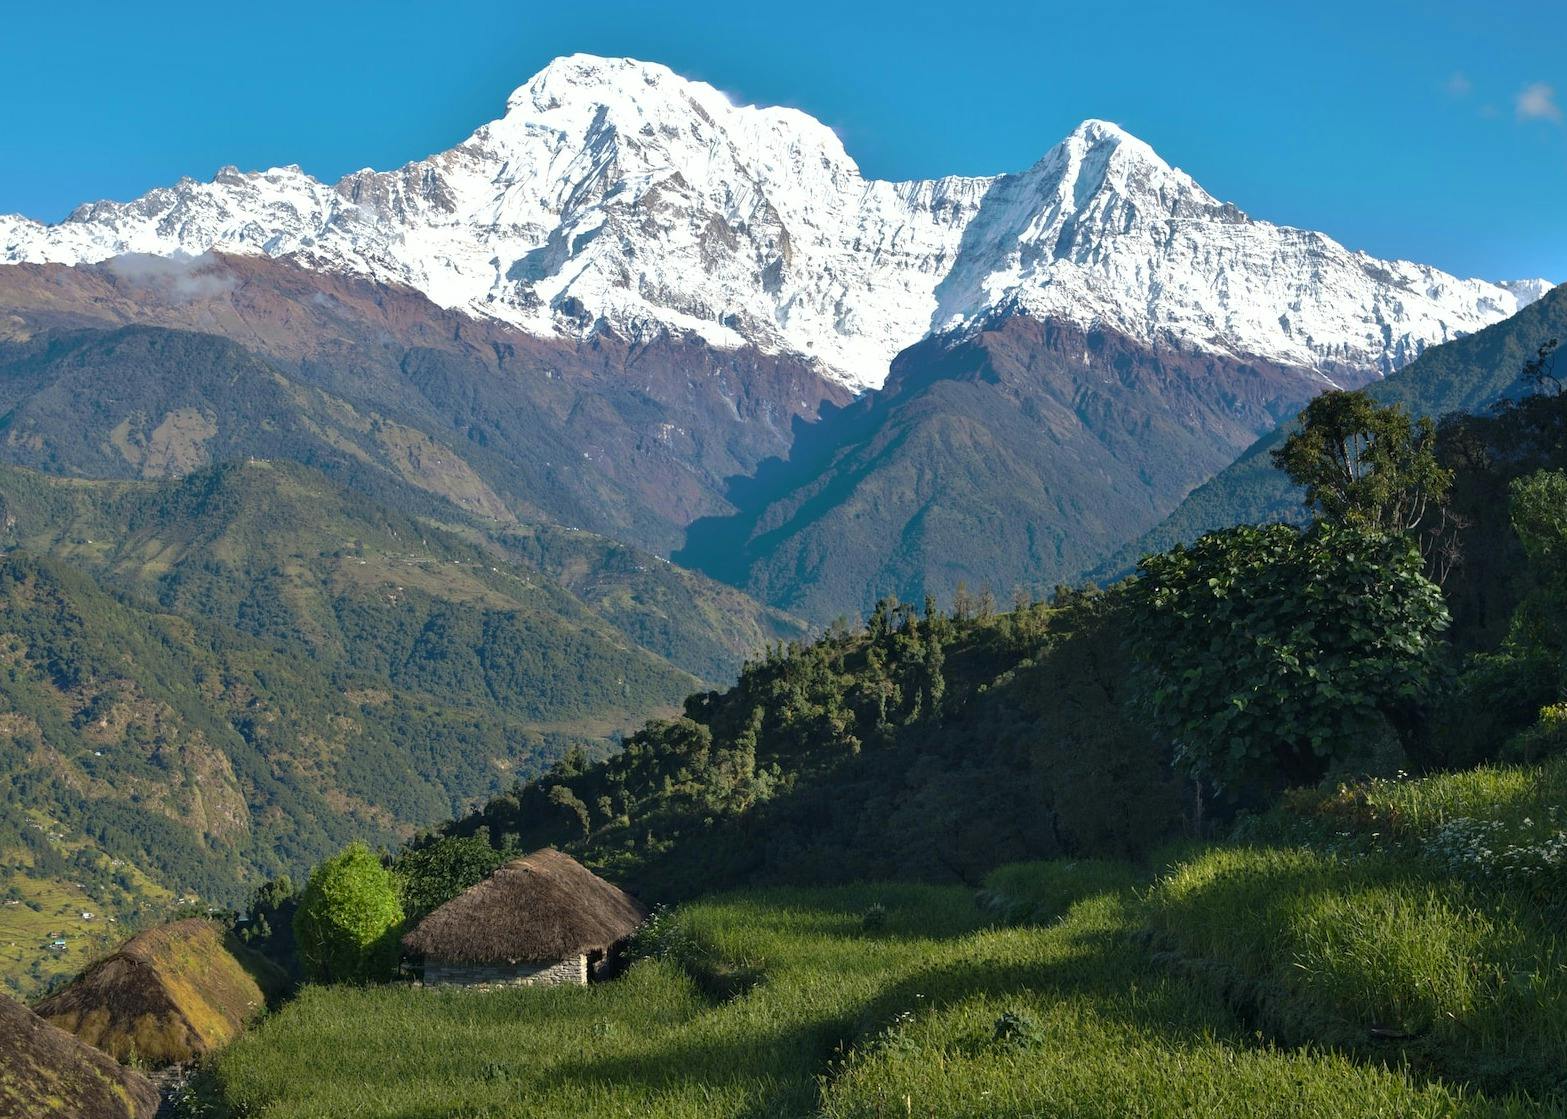 Top Treks in Annapurna Region: Guide to decide which treks fit you?